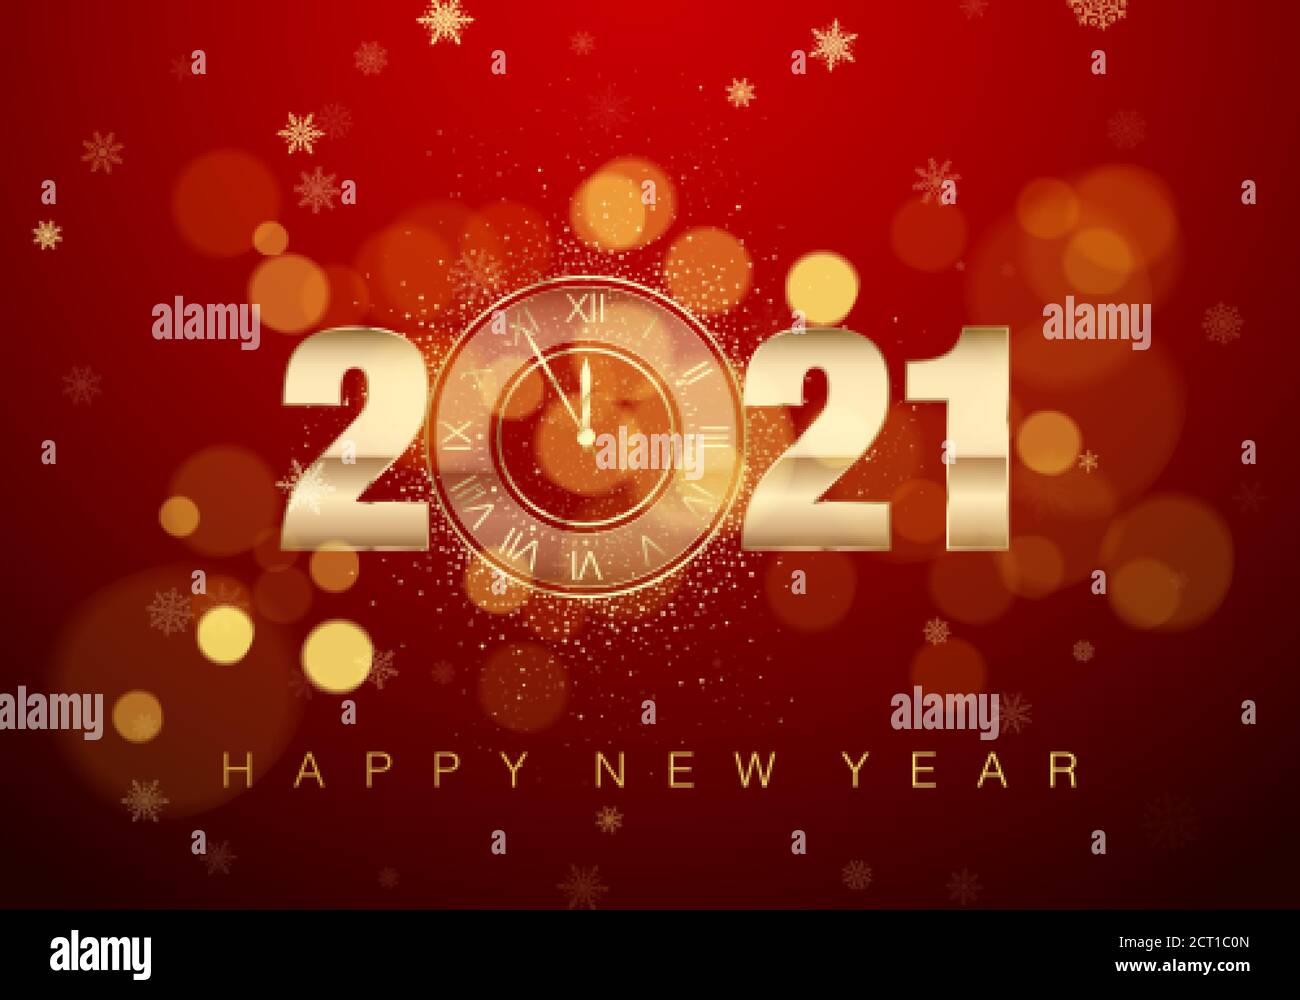 2021 New Year Poster with Greeting Text. Golden Clock instead of zero. Holiday midnight countdown in Red Colors. Vector illustration Stock Vector